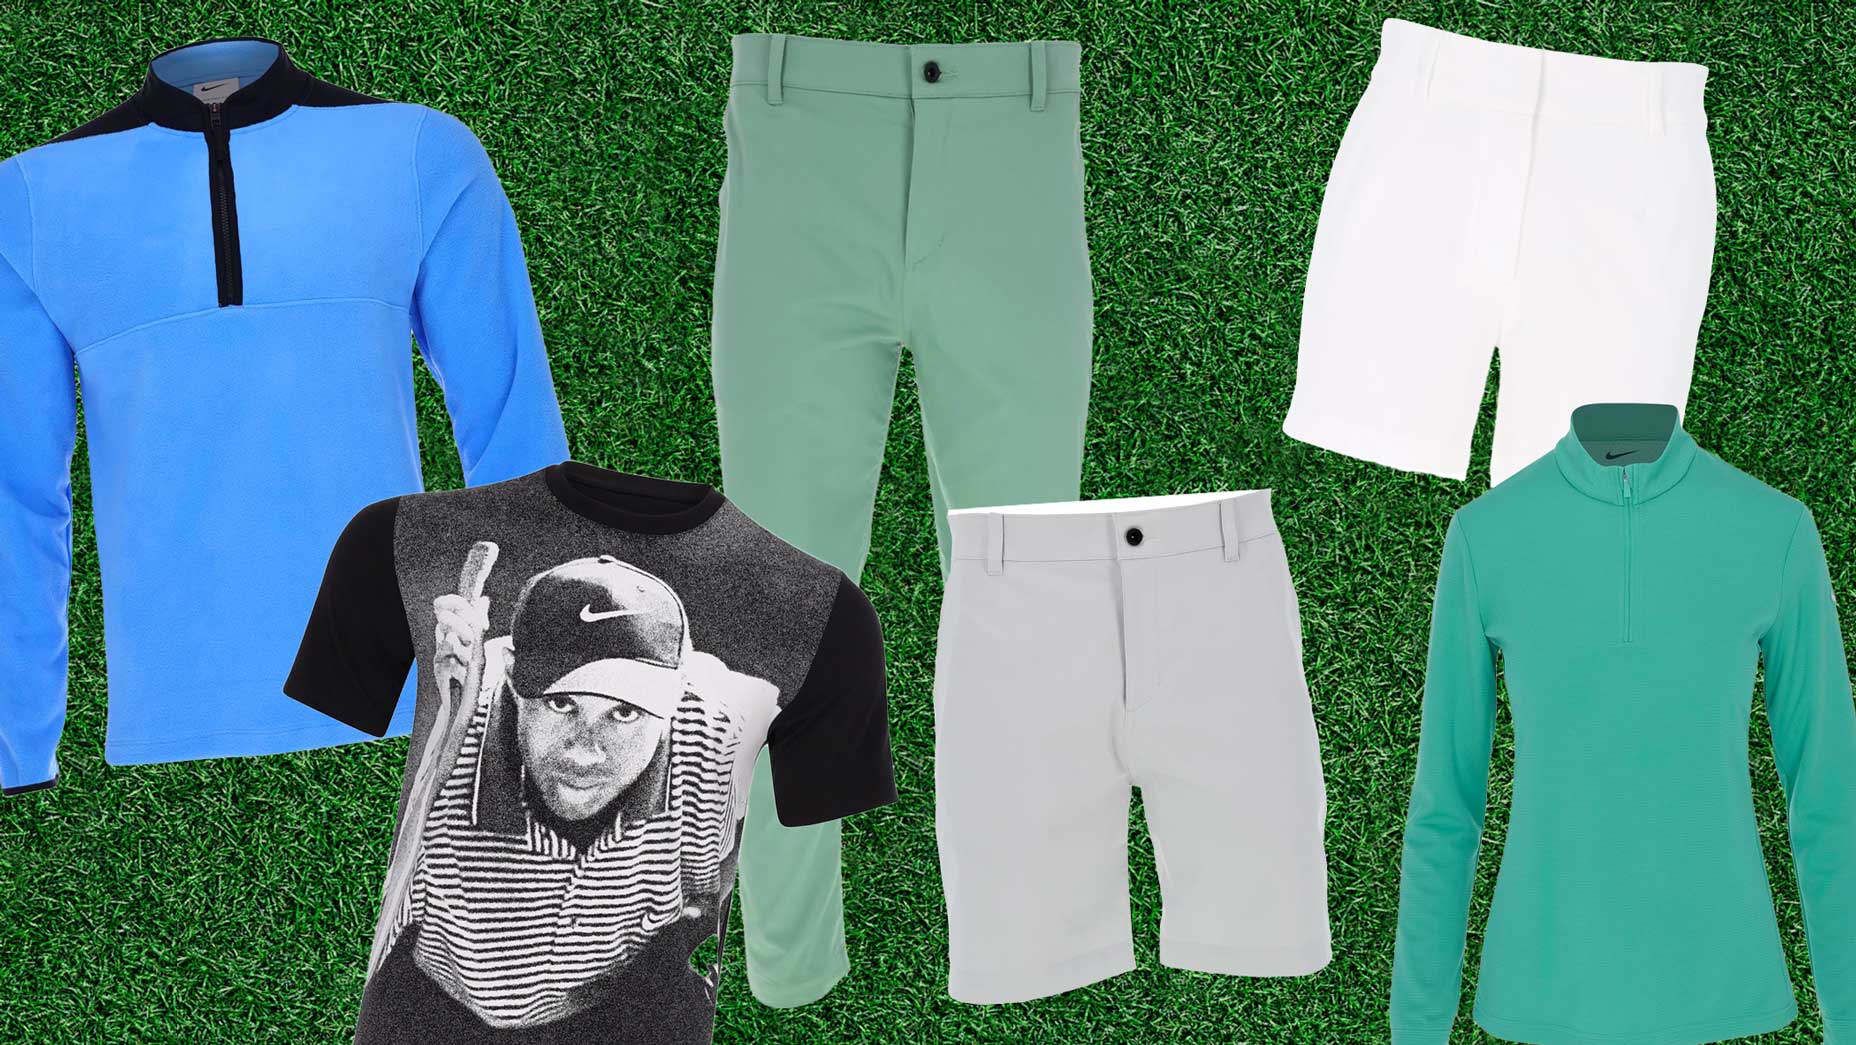 Nike Golf's Dads and Grads sale is happening right now for a limited time.